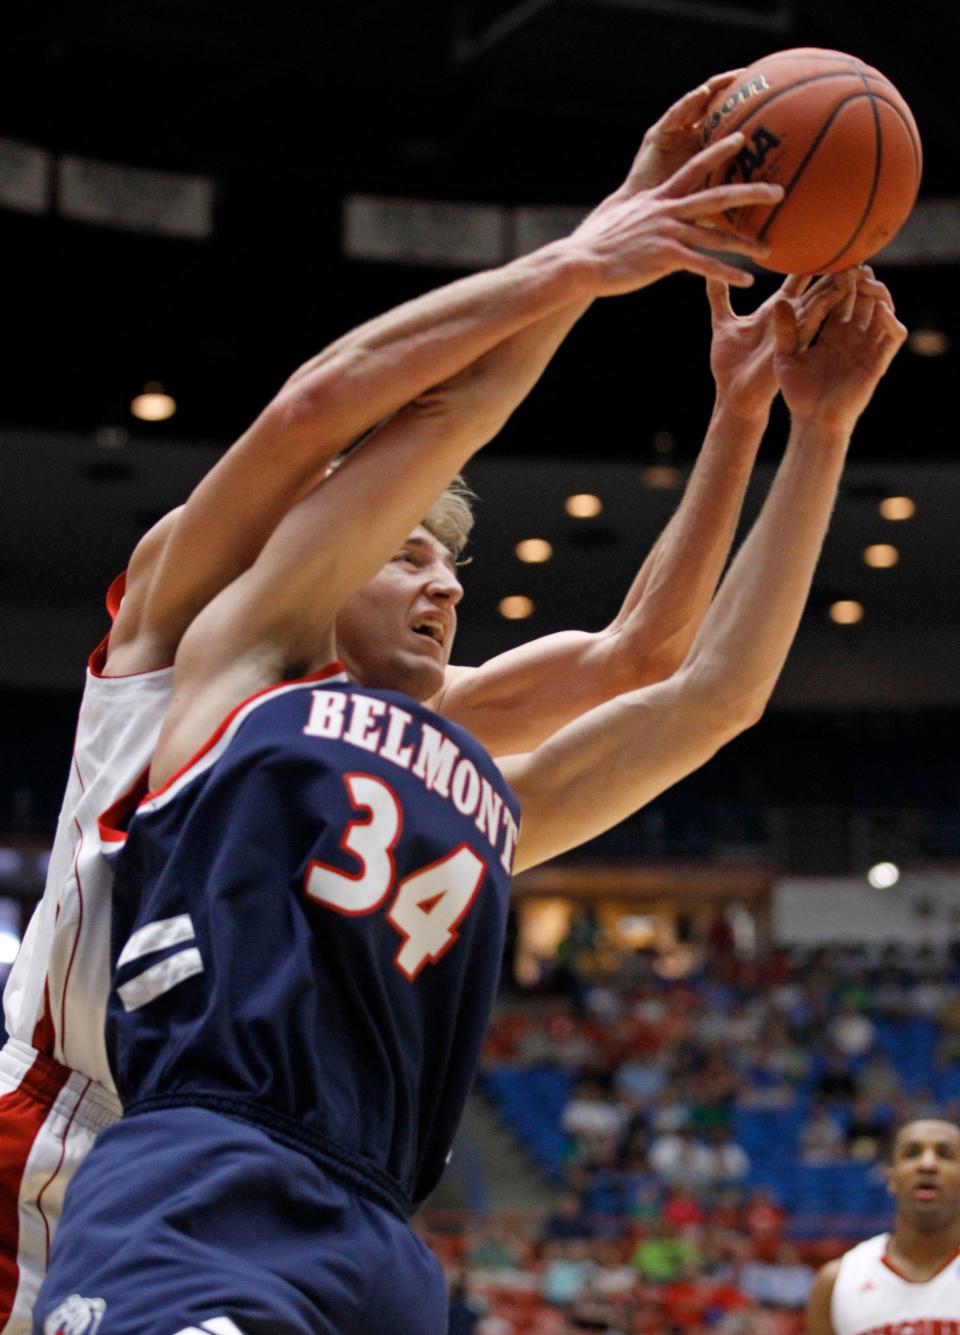 Belmont's Mick Hedgepeth (34) is shadowed by a Wisconsin defender in a fight for the ball during a Southeast Regional NCAA college basketball tournament second-round game Thursday, March 17, 2011, in Tucson, Ariz.  (AP Photo/Chris Carlson)